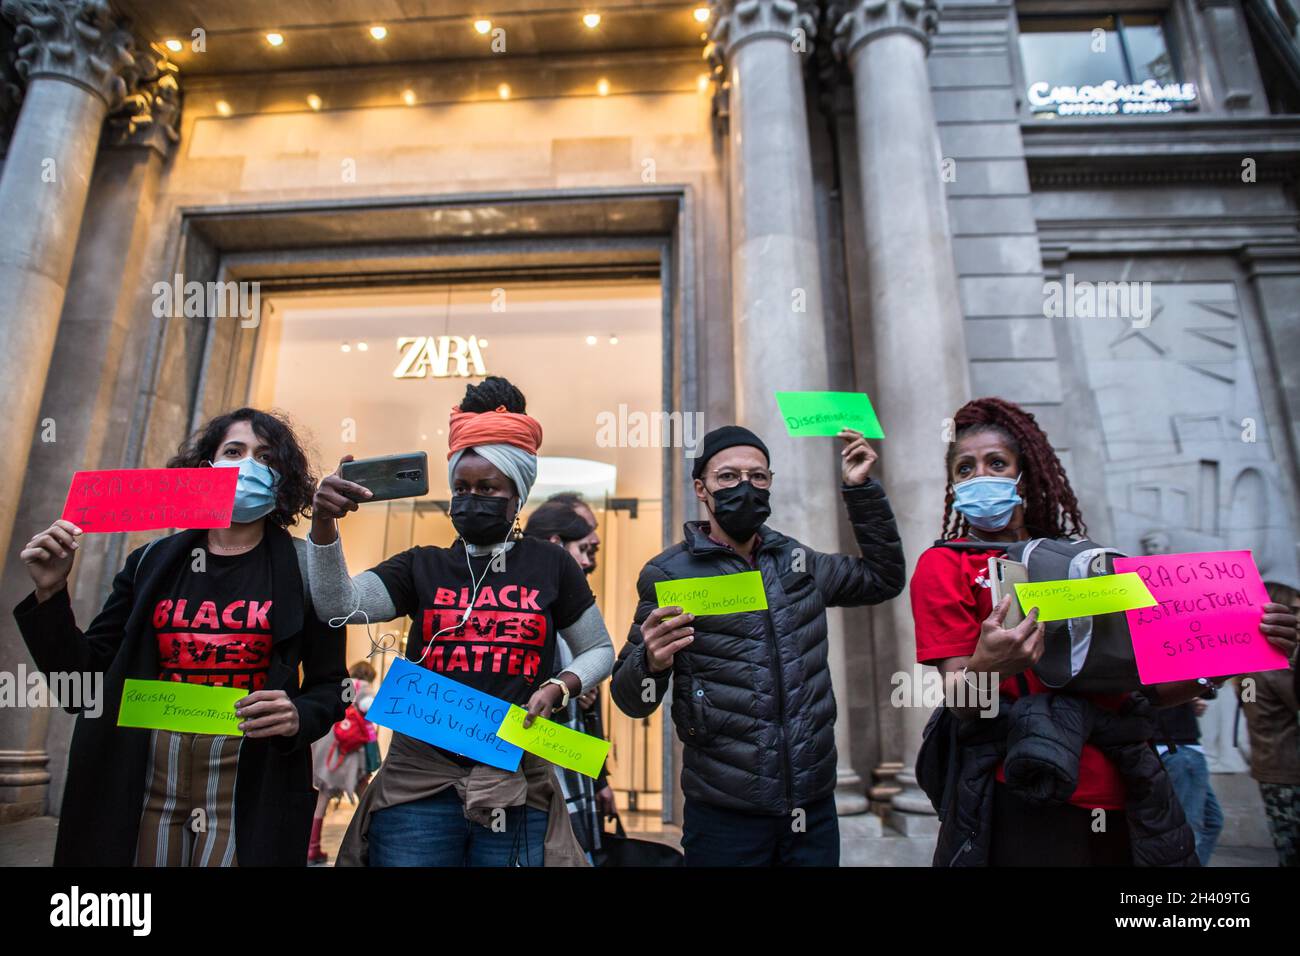 Barcelona, Catalonia, Spain. 29th Oct, 2021. Demonstrators are seen at the door of a clothing store, Zara with banners that say, institutional racism, ethnocentric racism, individual racism, discrimination, biological racism and structural or systematic racism.A group of Brazilian activists in Barcelona has held a demonstration inside and outside the main Spanish clothing store, Zara in Barcelona, due to various cases in the last month, in Brazil, in which black people were the victim of racist attacks by the stores Zara which led to a protocol investigation. The investigations affirm that Stock Photo